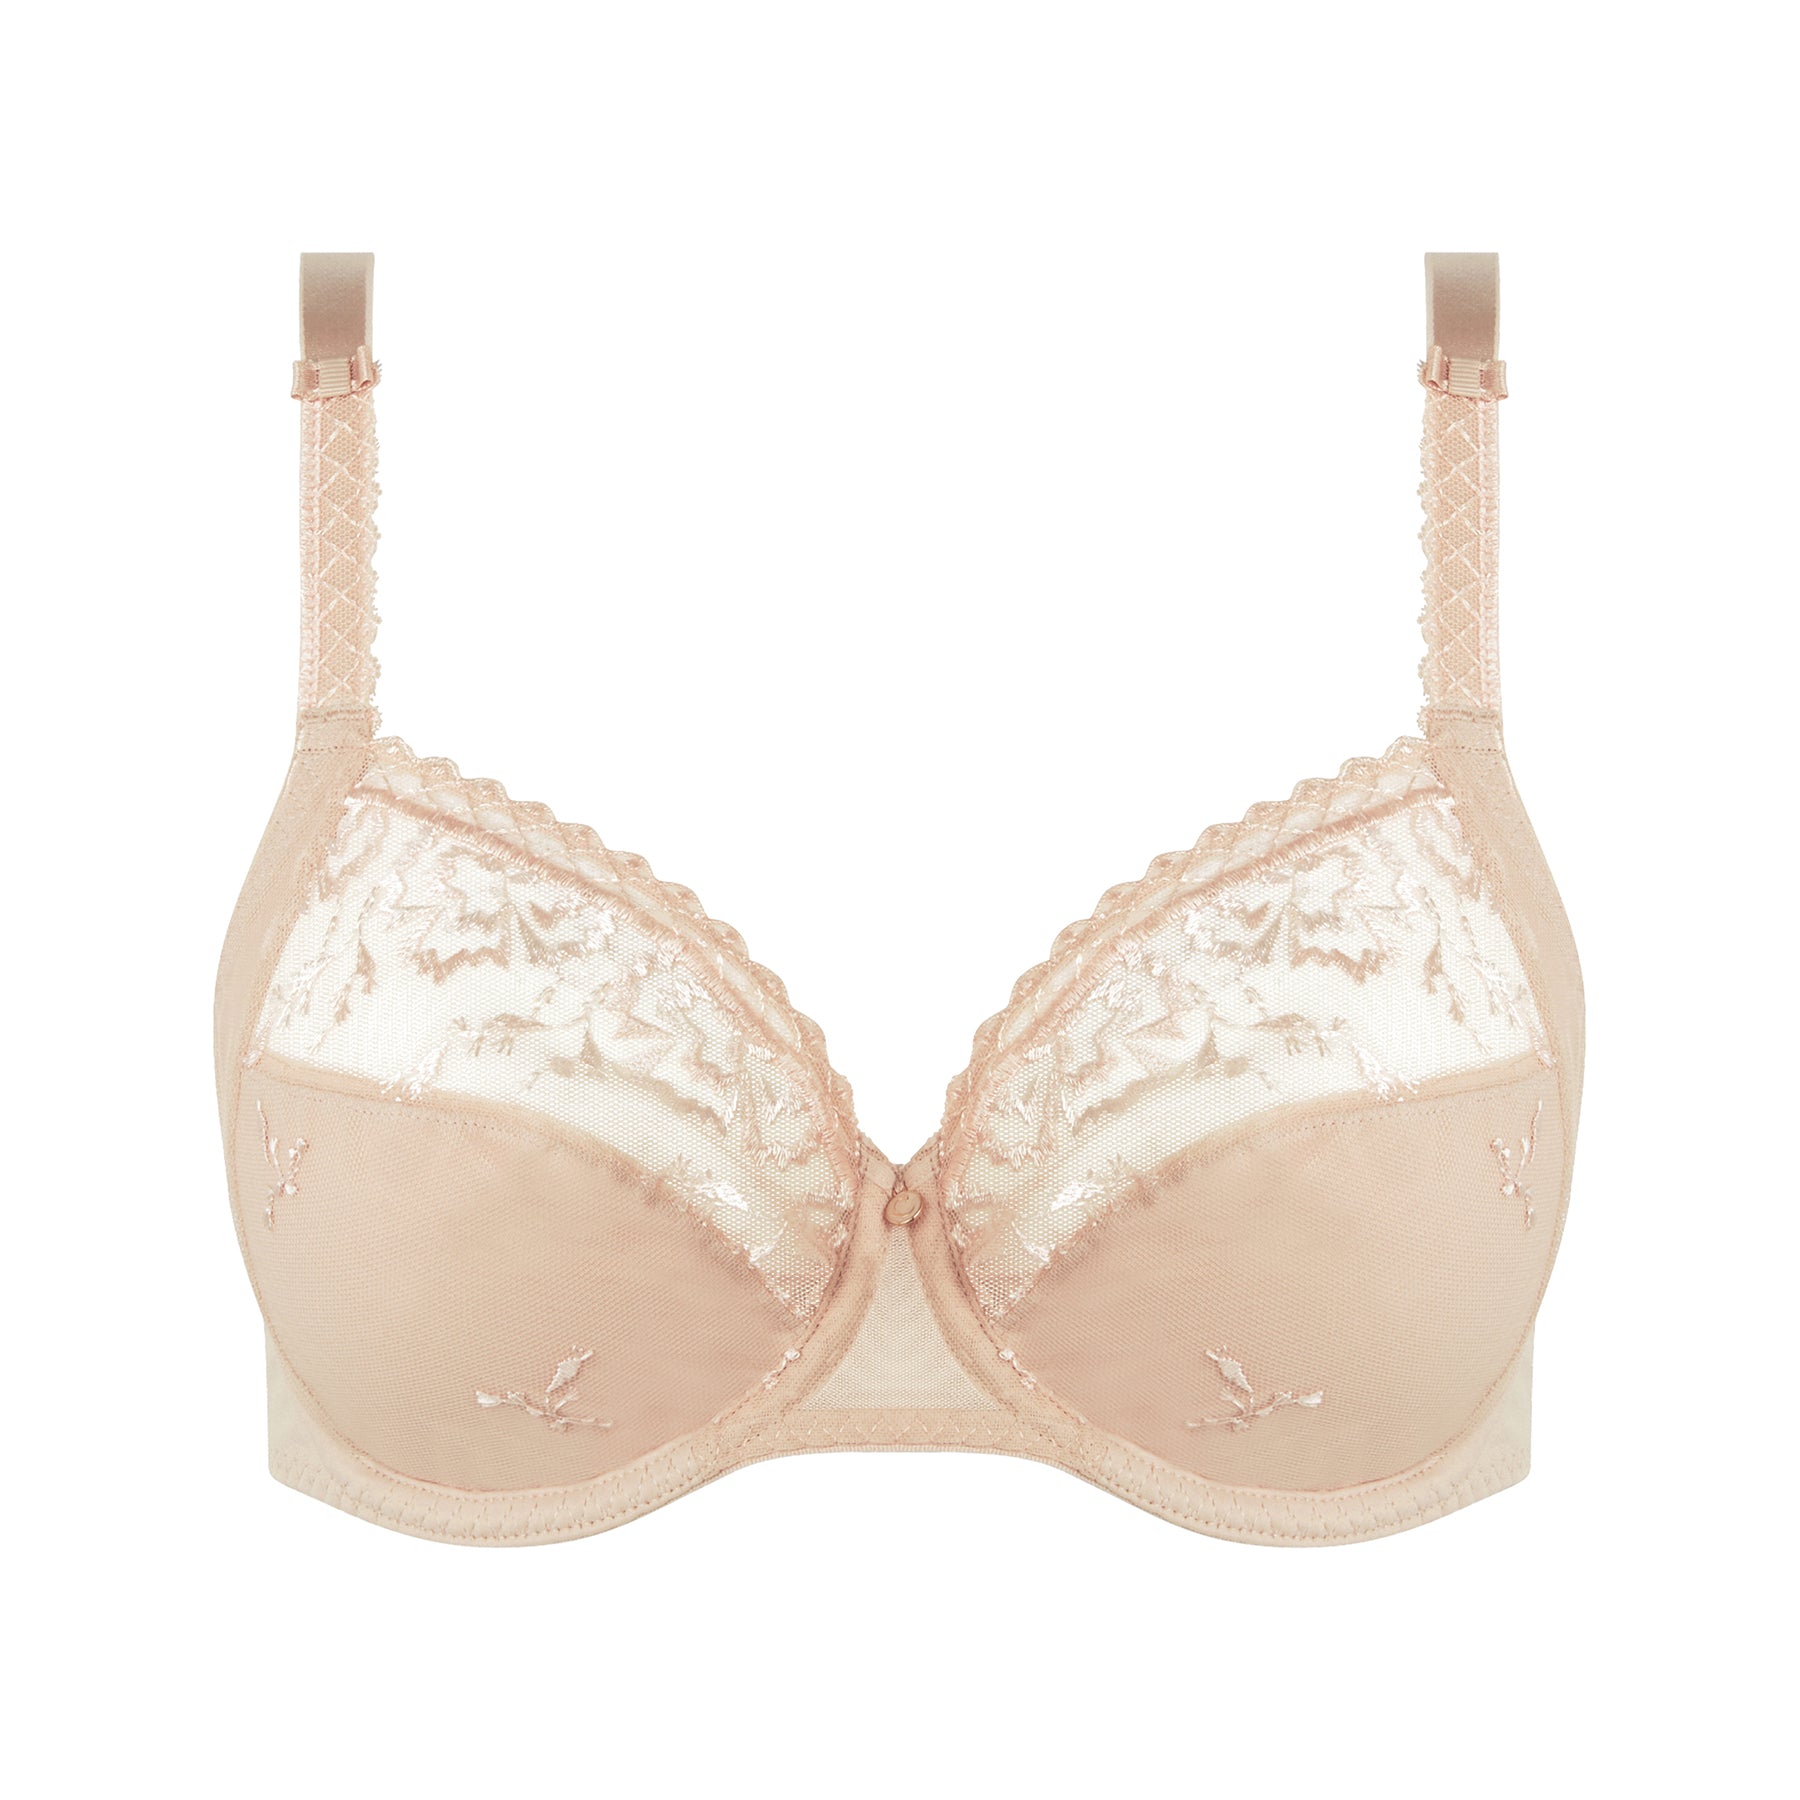 Chantelle Every Curve Full Cup Bra